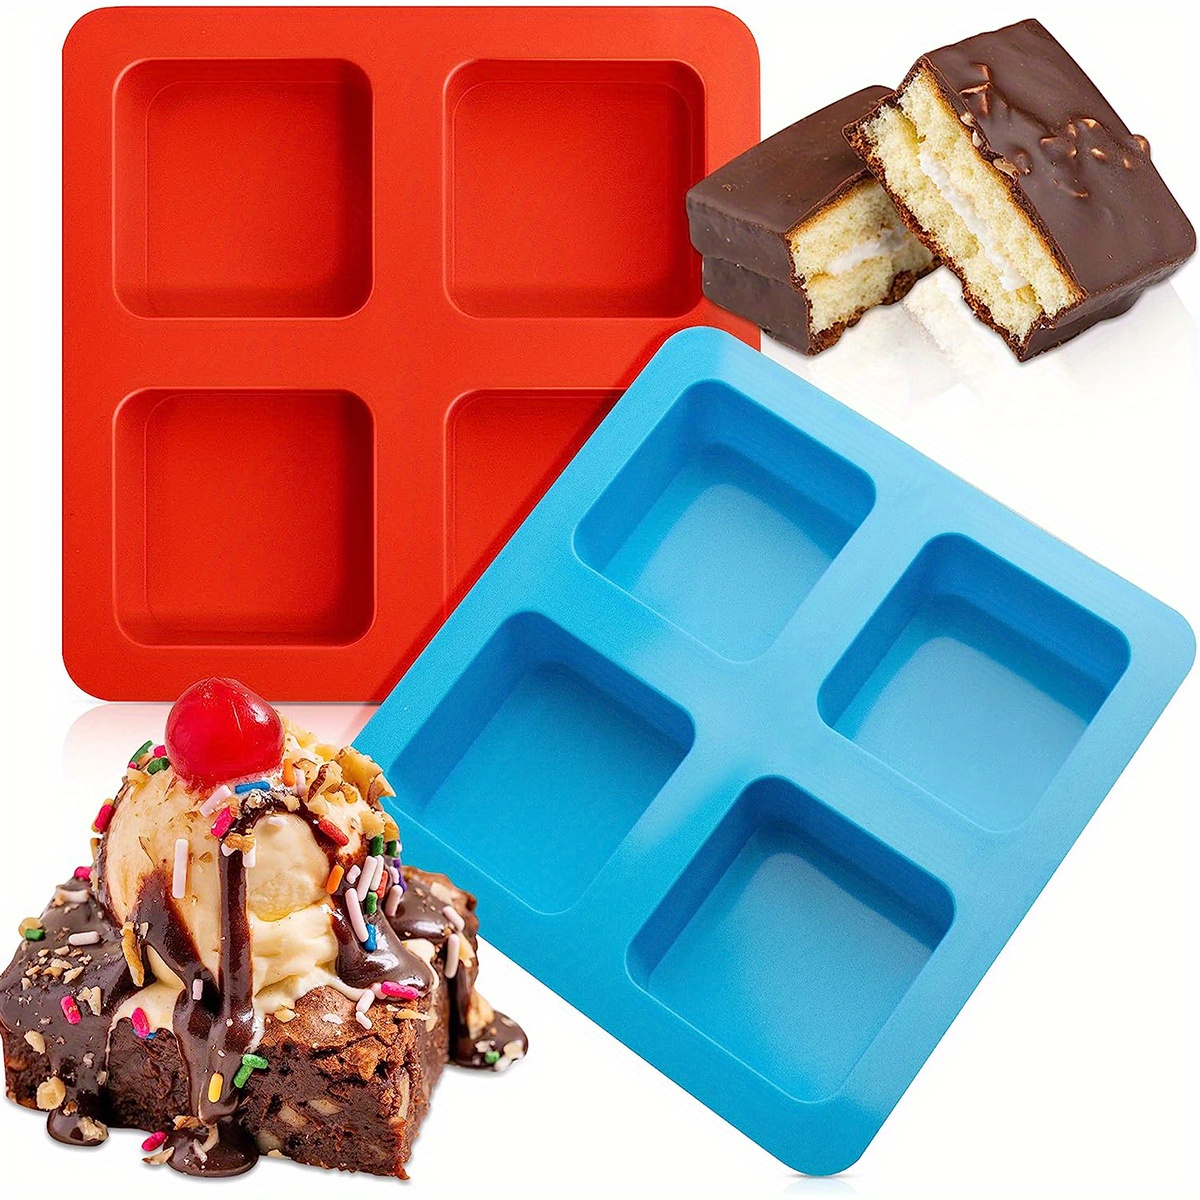 2 Pcs 4 Cavity Chocolate Covered Cookies Molds for S'mores, Square